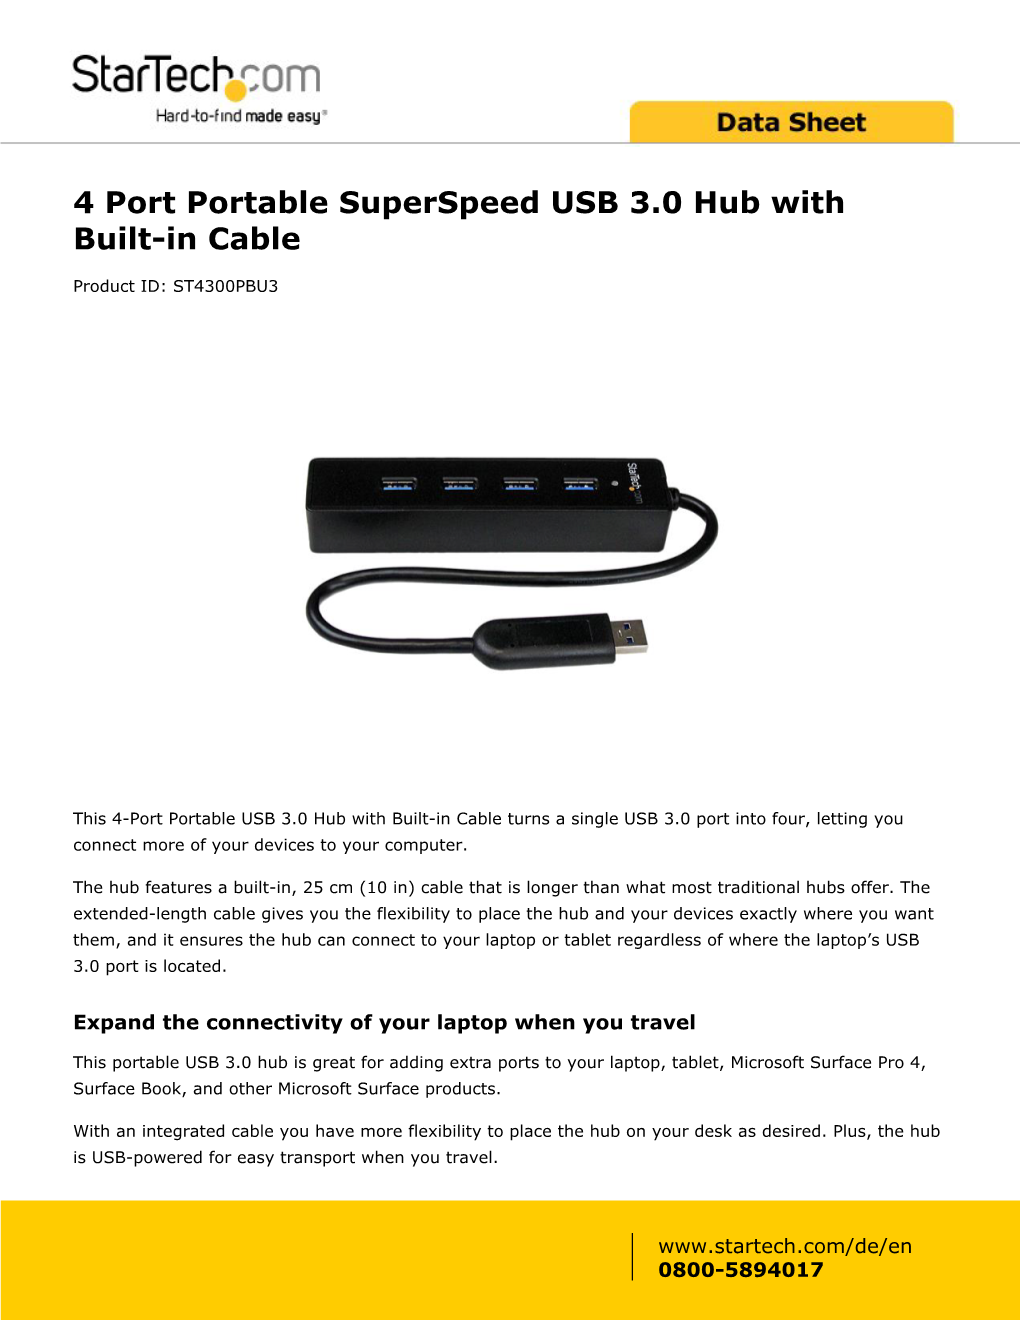 4 Port Portable Superspeed USB 3.0 Hub with Built-In Cable